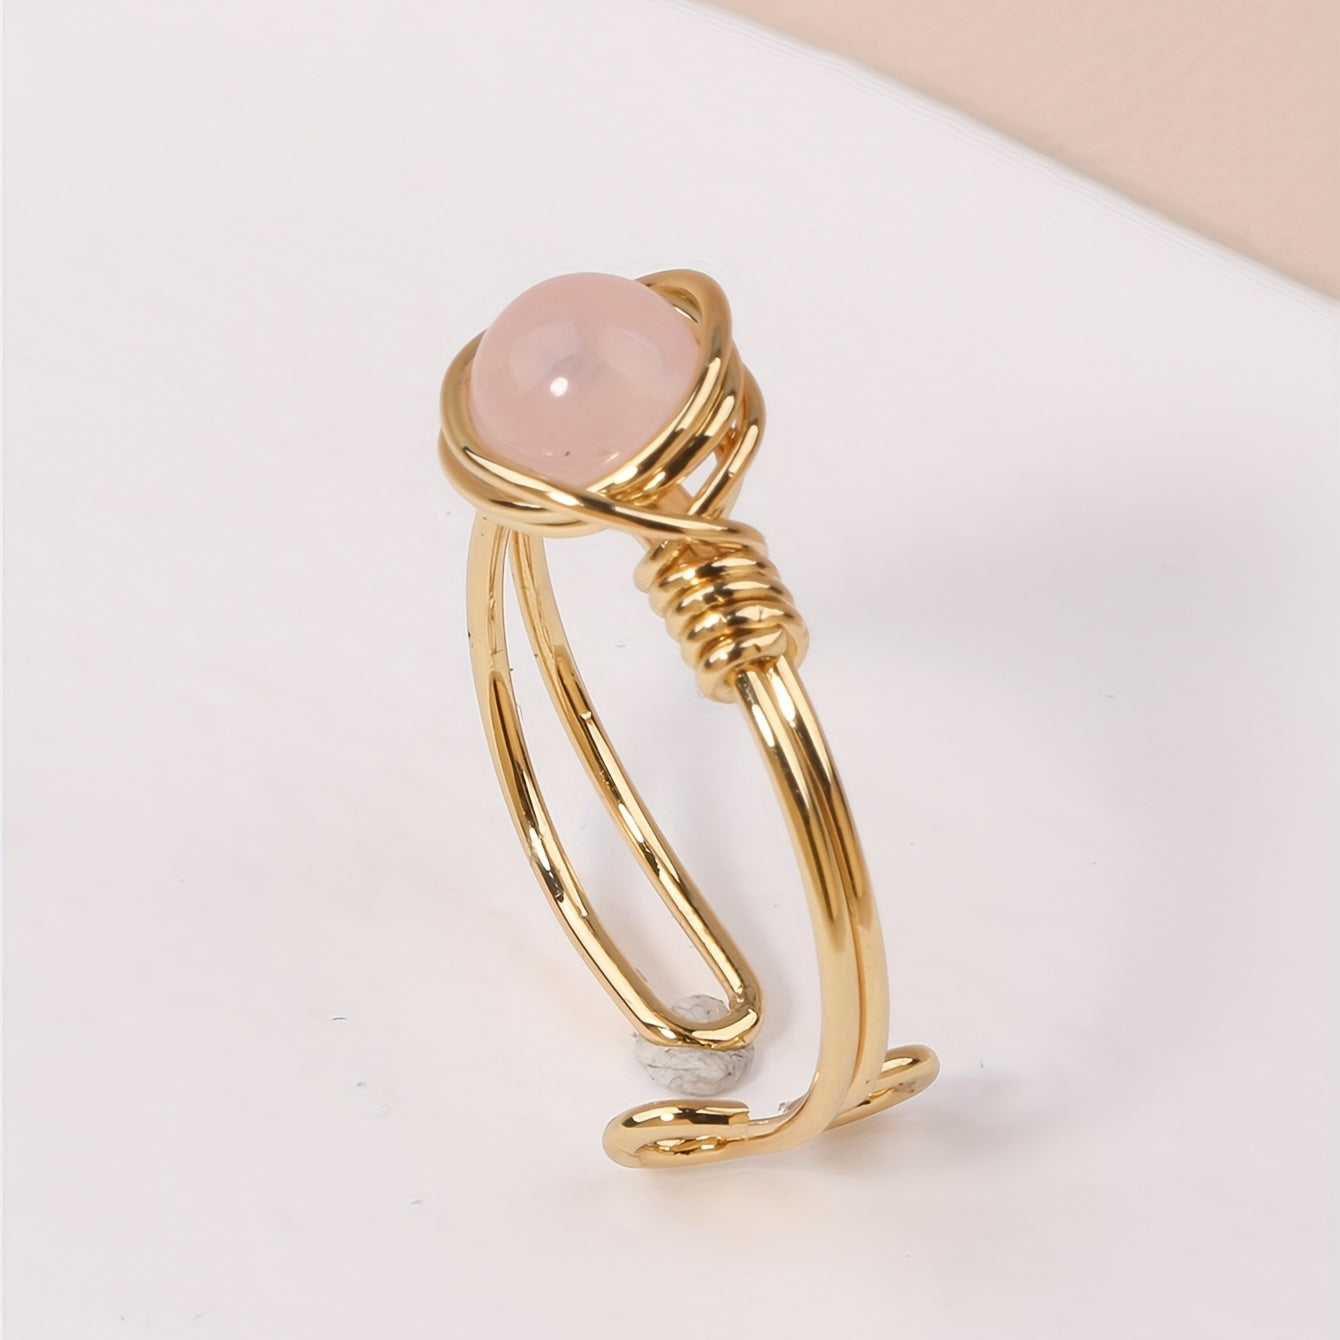 Healing Crystal Open Ring Women Irregular Crystal Wire Wrapped Ring Adjustable Finger Ring